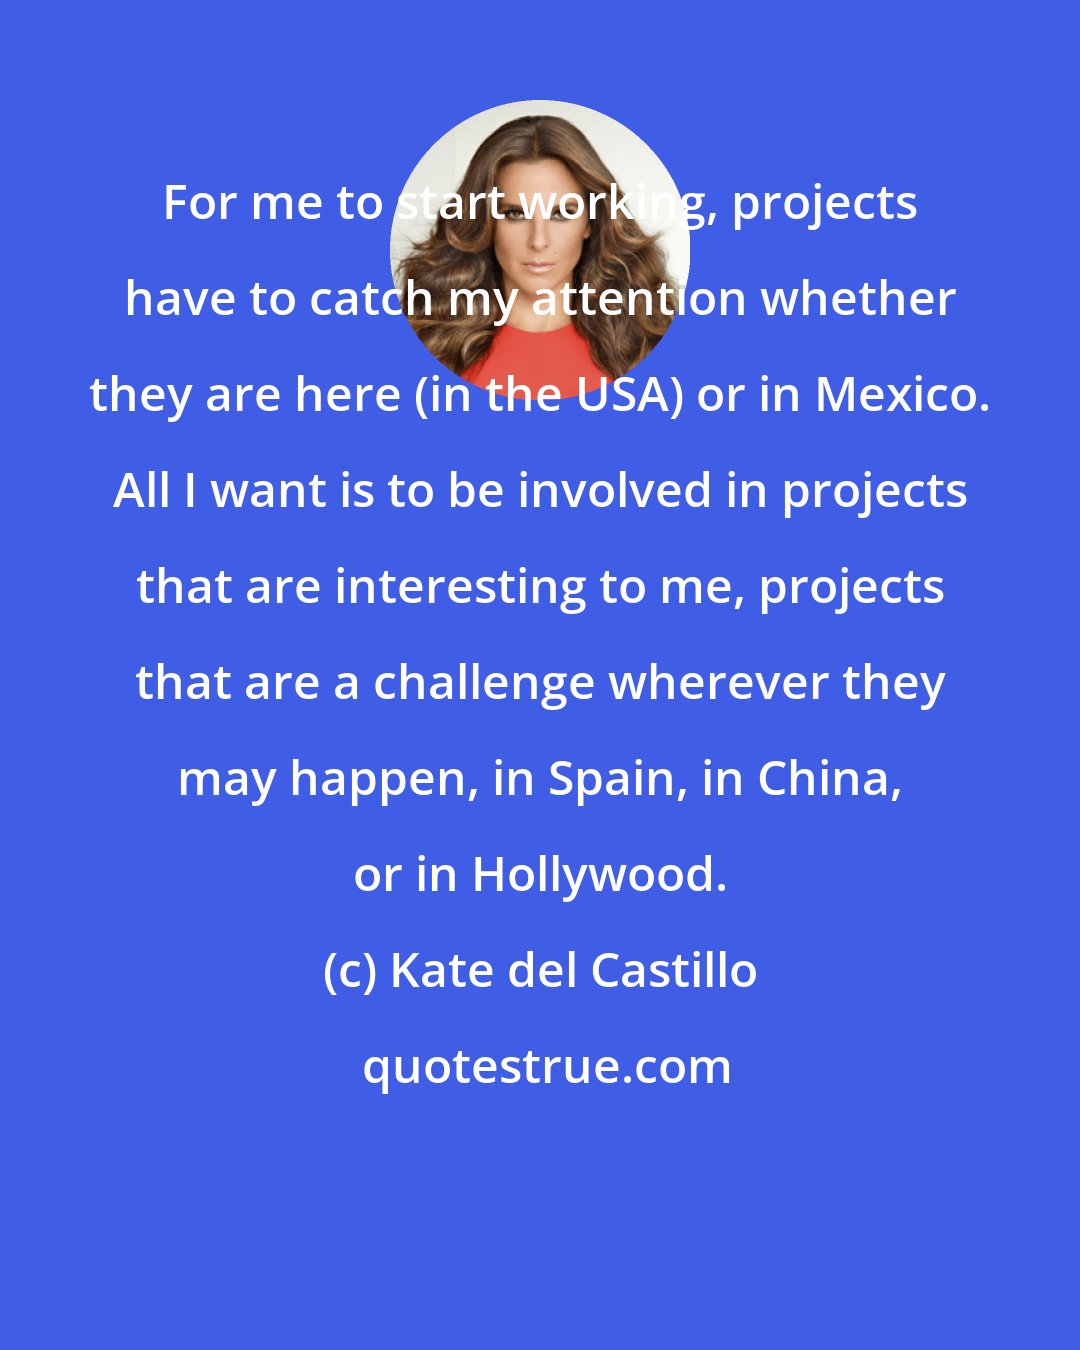 Kate del Castillo: For me to start working, projects have to catch my attention whether they are here (in the USA) or in Mexico. All I want is to be involved in projects that are interesting to me, projects that are a challenge wherever they may happen, in Spain, in China, or in Hollywood.